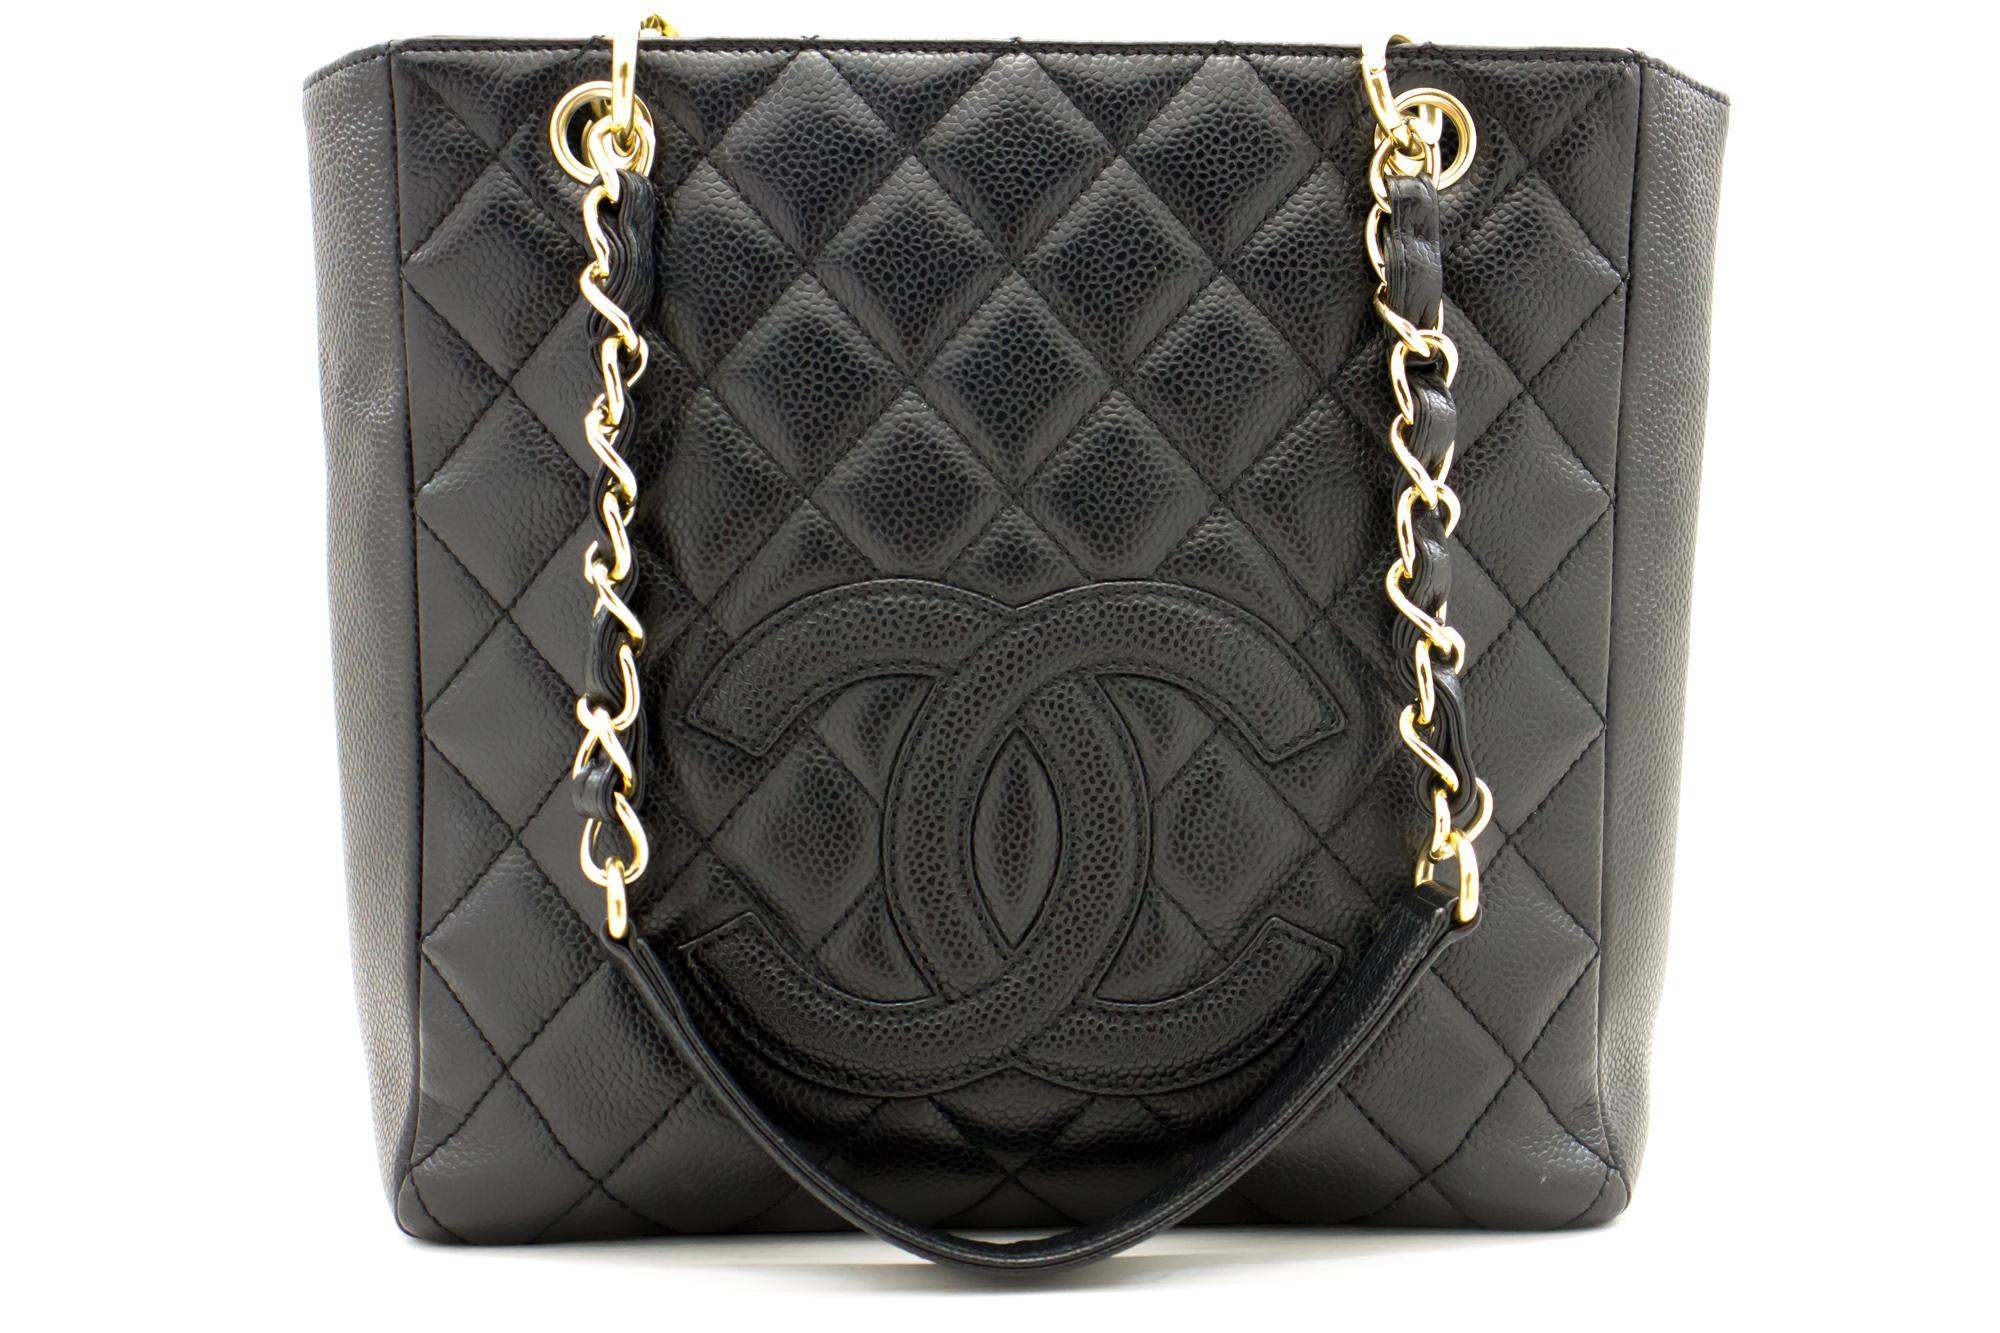 An authentic CHANEL Caviar PST Chain Shoulder Bag Shopping Tote Black Quilted. The color is Black. The outside material is Leather. The pattern is Solid. This item is Contemporary. The year of manufacture would be 2006.
Conditions & Ratings
Outside